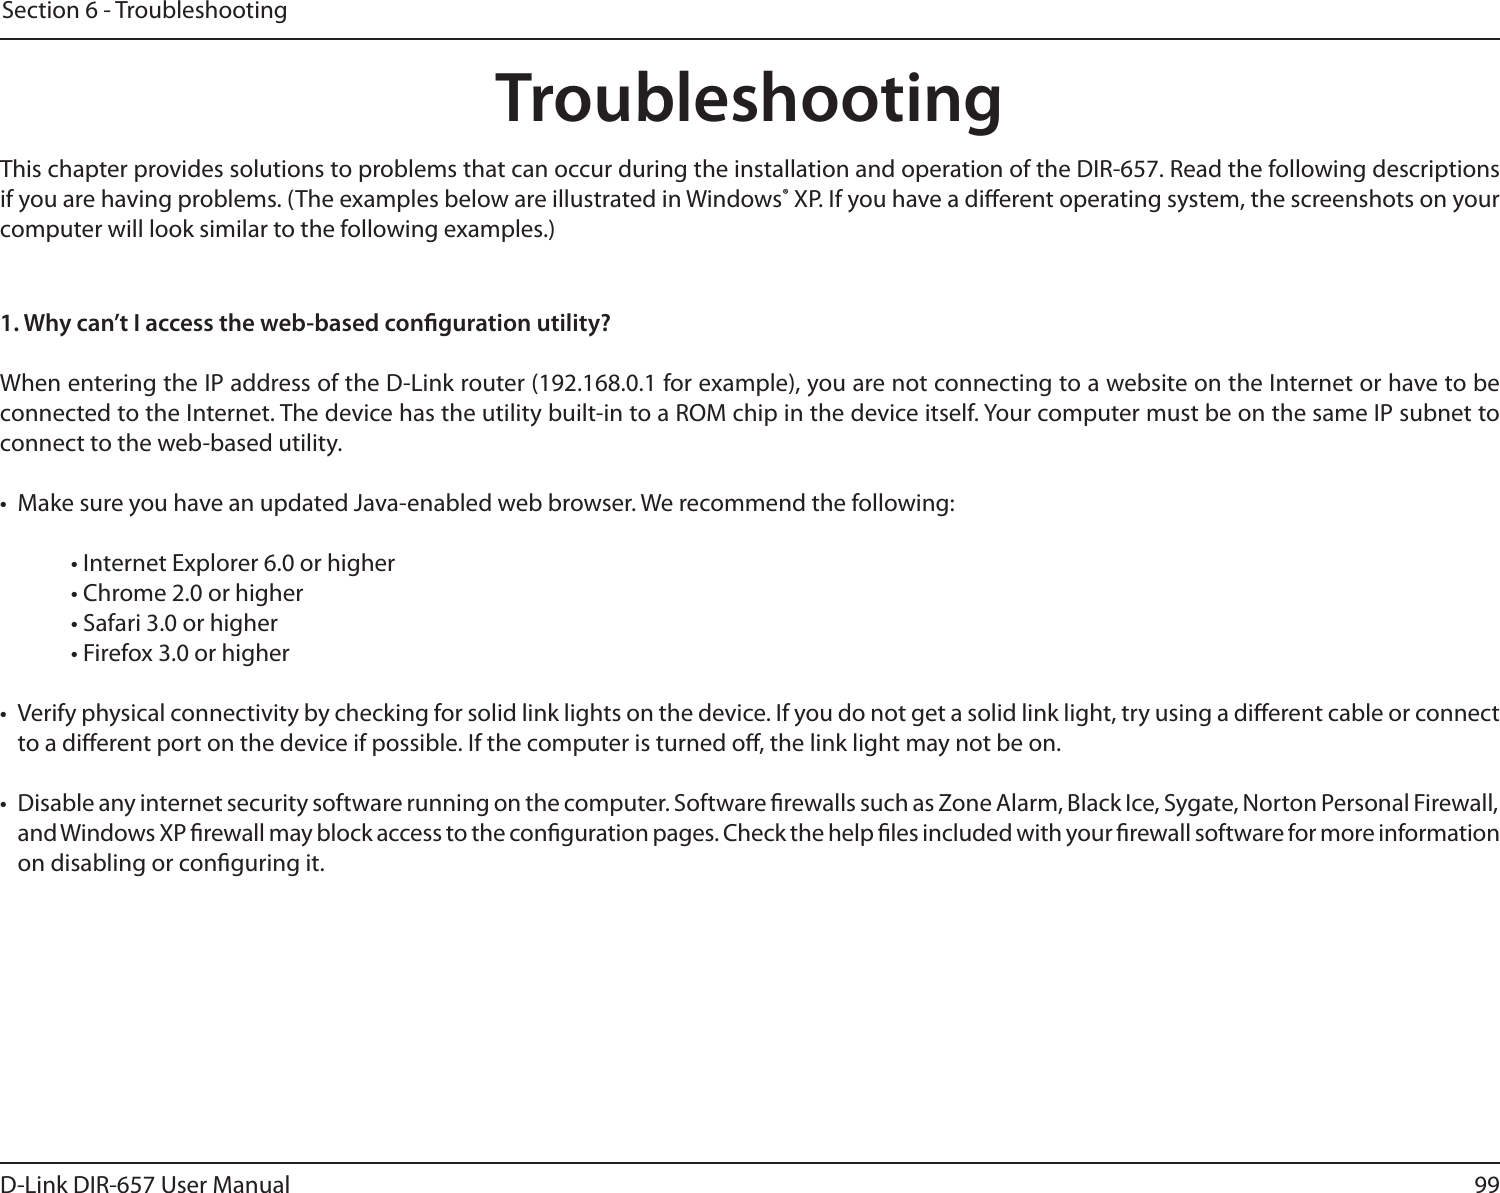 99D-Link DIR-657 User ManualSection 6 - TroubleshootingTroubleshootingThis chapter provides solutions to problems that can occur during the installation and operation of the DIR-657. Read the following descriptions if you are having problems. (The examples below are illustrated in Windows® XP. If you have a dierent operating system, the screenshots on your computer will look similar to the following examples.)1. Why can’t I access the web-based conguration utility?When entering the IP address of the D-Link router (192.168.0.1 for example), you are not connecting to a website on the Internet or have to be connected to the Internet. The device has the utility built-in to a ROM chip in the device itself. Your computer must be on the same IP subnet to connect to the web-based utility. •  Make sure you have an updated Java-enabled web browser. We recommend the following: • Internet Explorer 6.0 or higher • Chrome 2.0 or higher • Safari 3.0 or higher • Firefox 3.0 or higher •  Verify physical connectivity by checking for solid link lights on the device. If you do not get a solid link light, try using a dierent cable or connect to a dierent port on the device if possible. If the computer is turned o, the link light may not be on.•  Disable any internet security software running on the computer. Software rewalls such as Zone Alarm, Black Ice, Sygate, Norton Personal Firewall, and Windows XP rewall may block access to the conguration pages. Check the help les included with your rewall software for more information on disabling or conguring it.